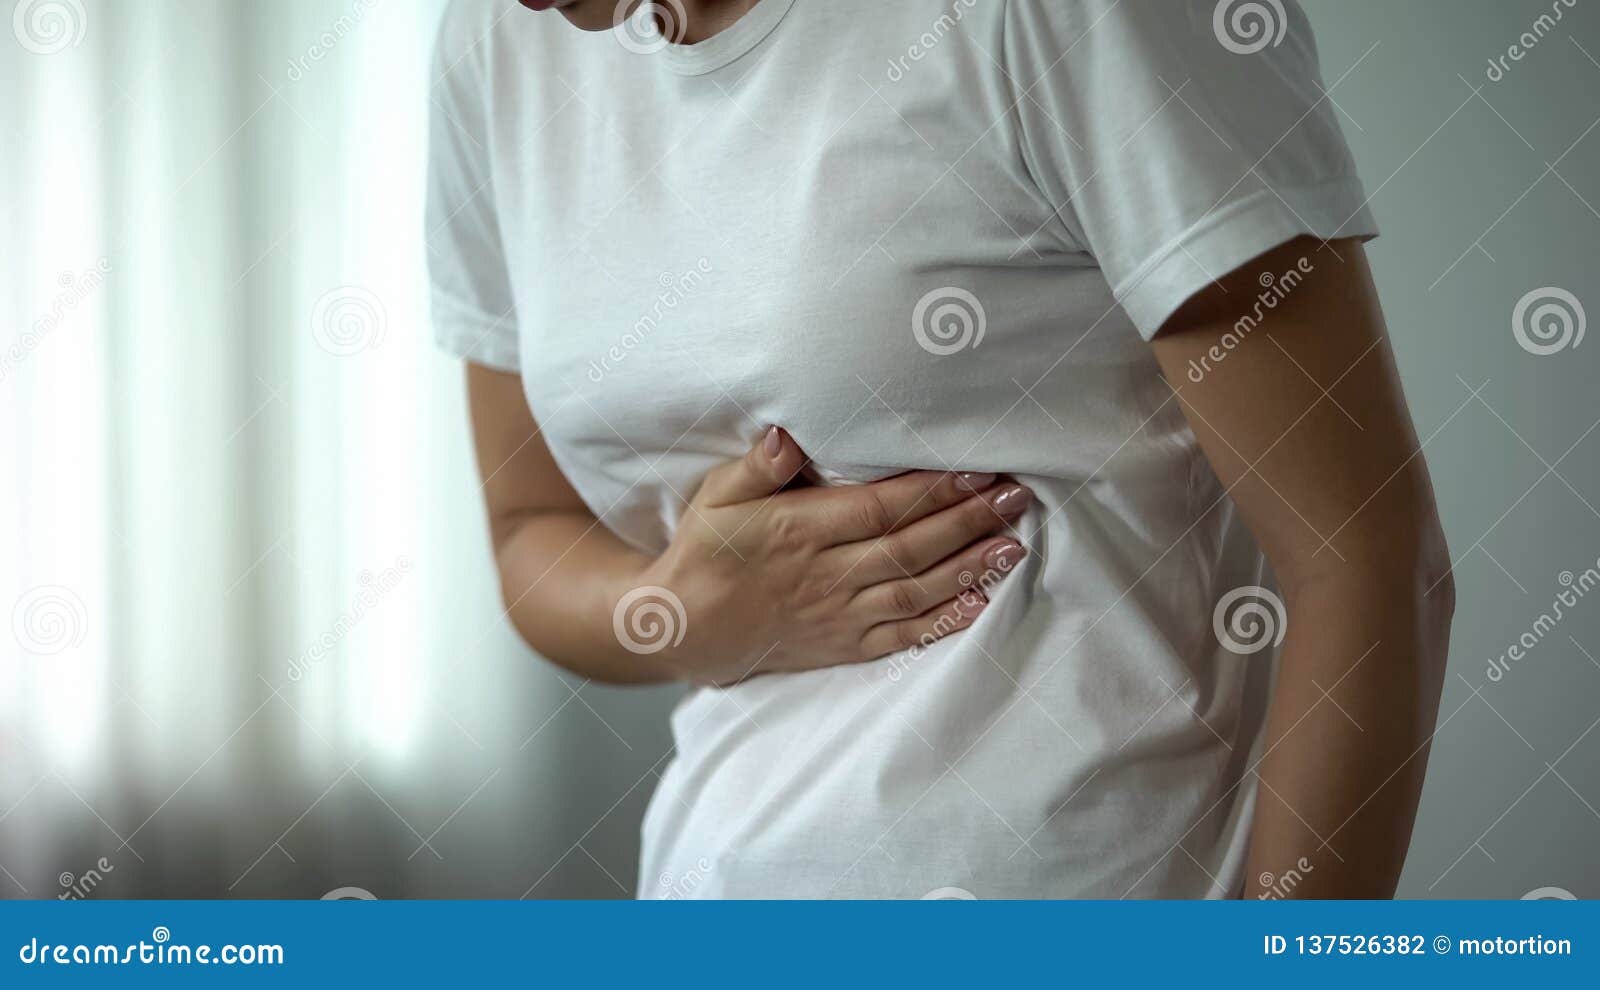 female feeling stomachache, suffering from peptic ulcer, unhealthy eating result